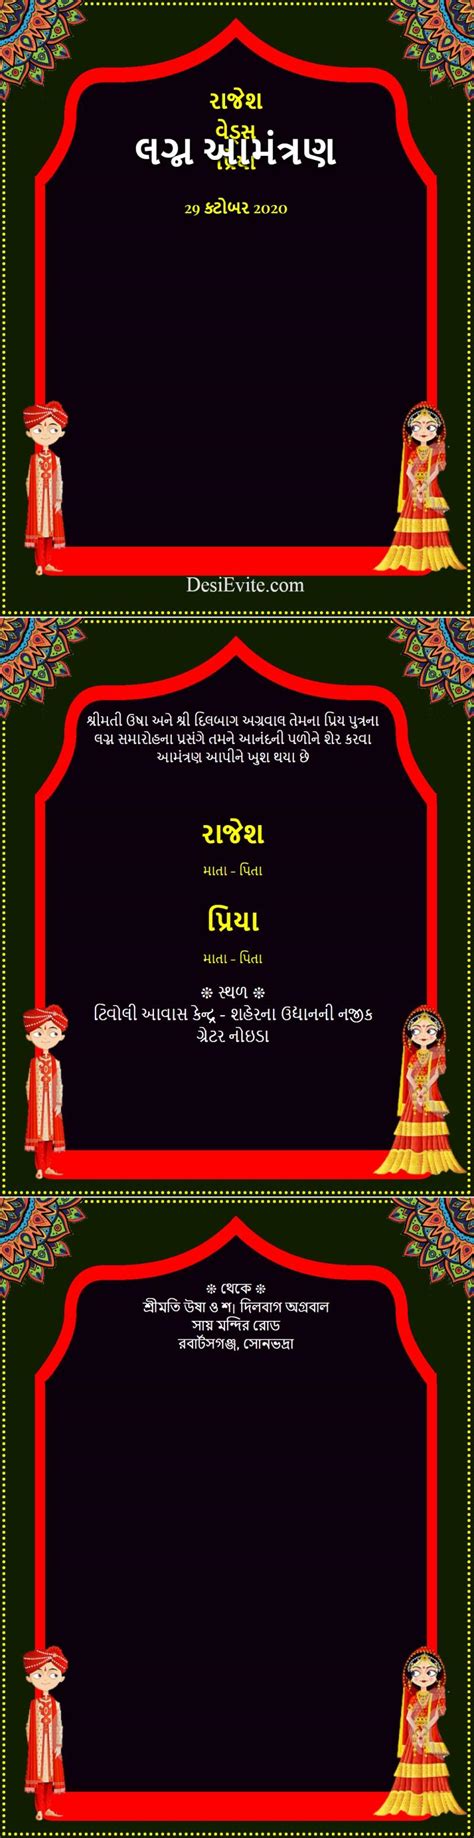 Gujarati Wedding Invitation Card With 3 Pages